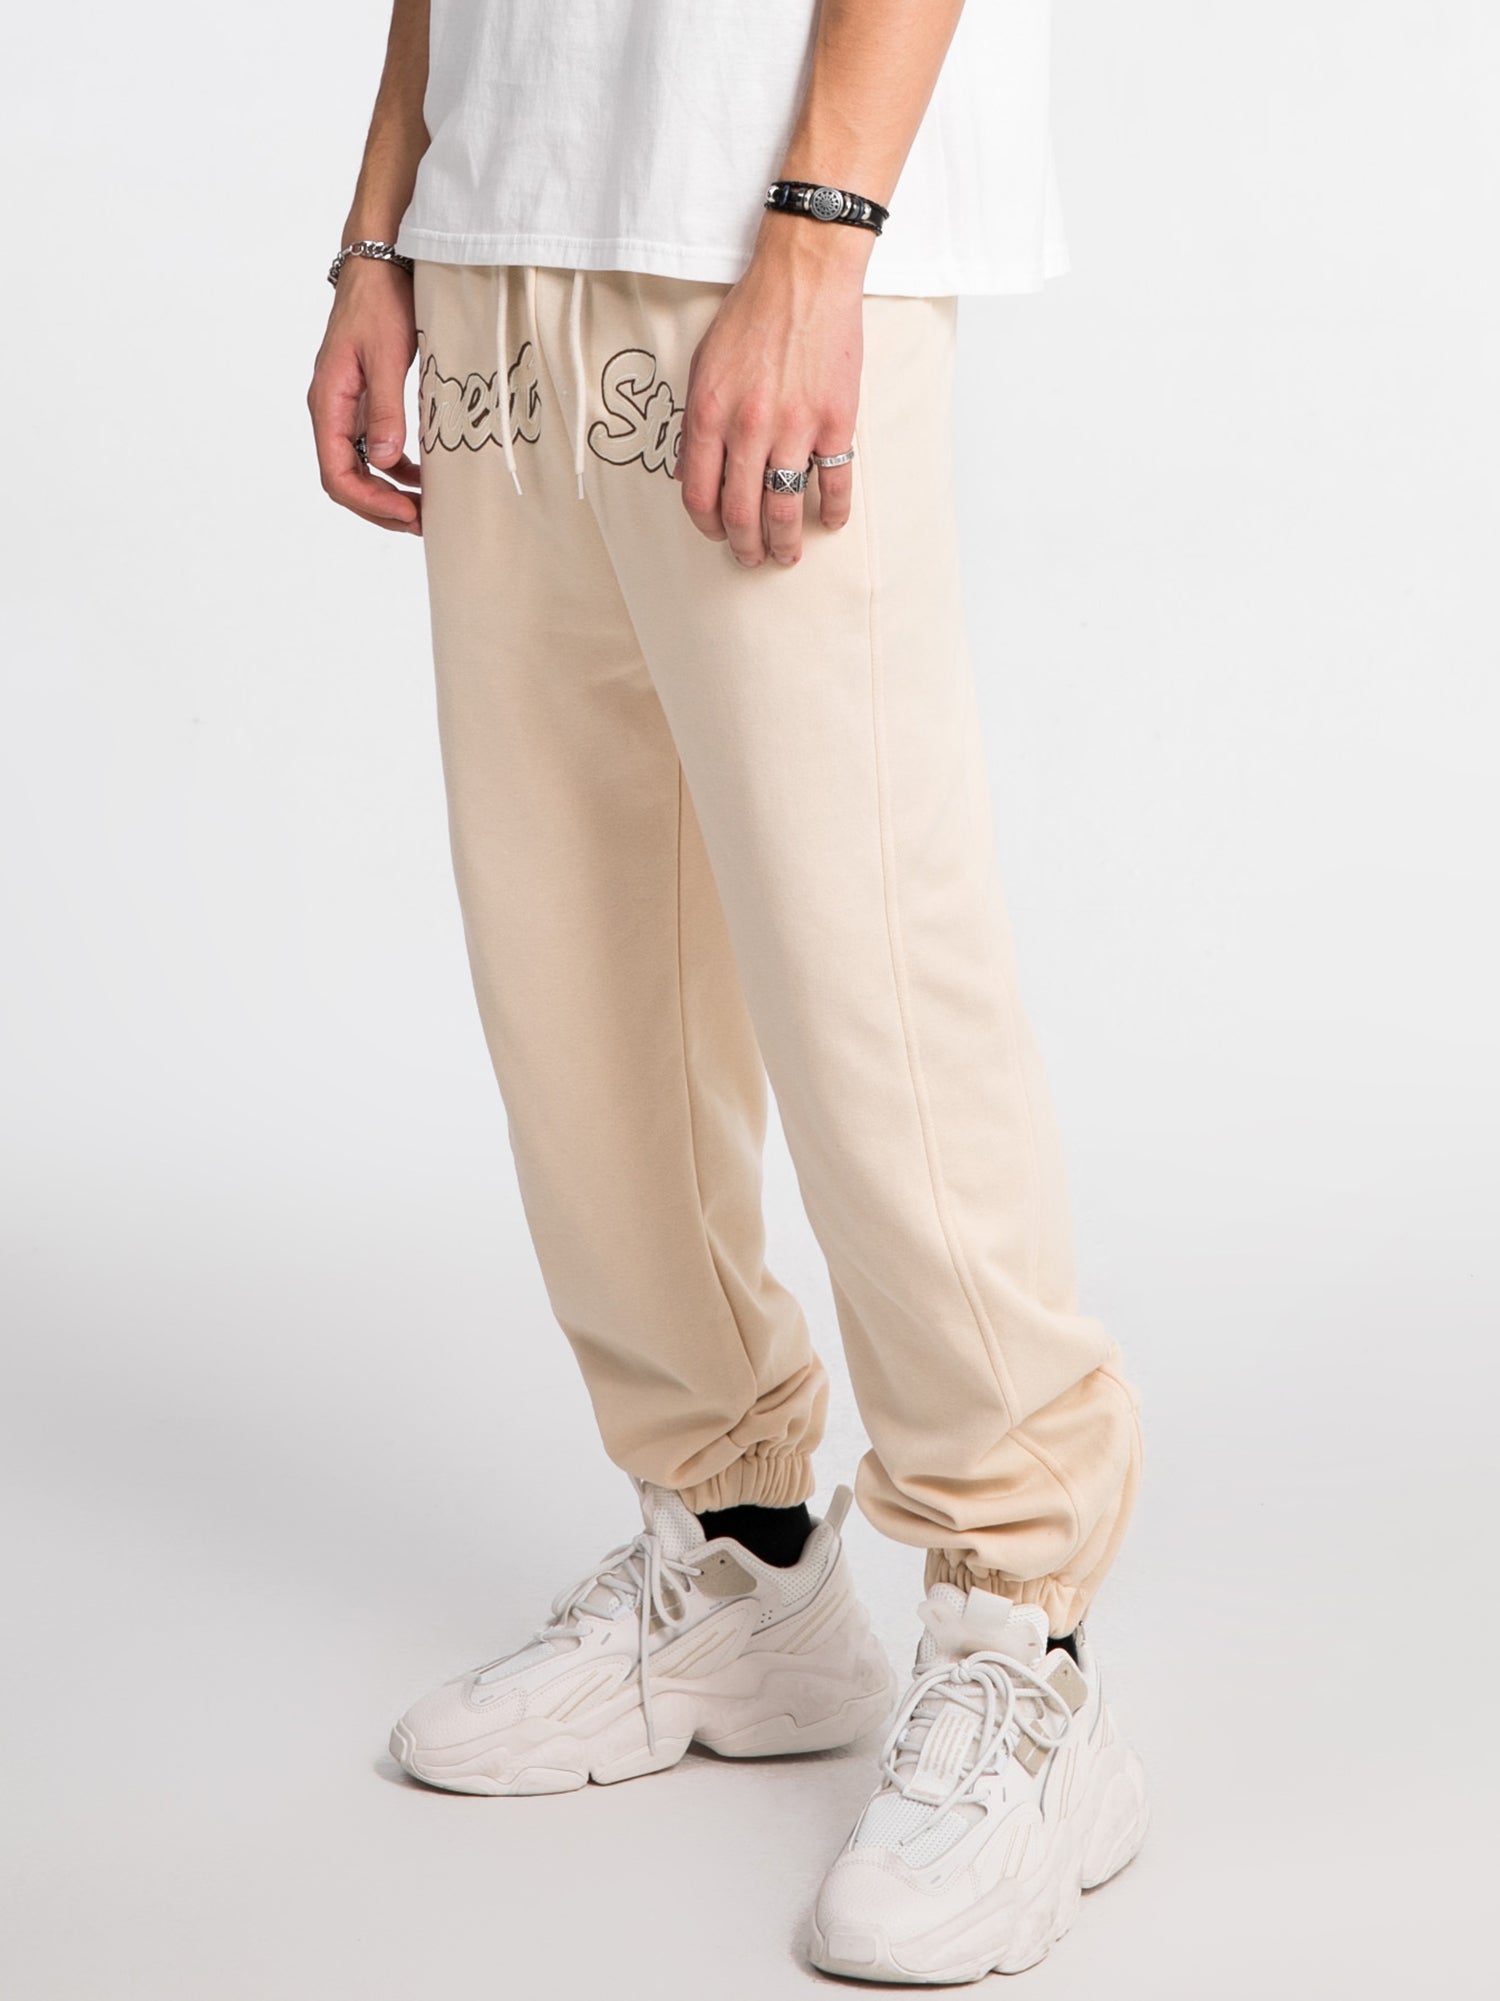 JUSTNOTAG Casual Letter Catton Drawstring Waist Pants